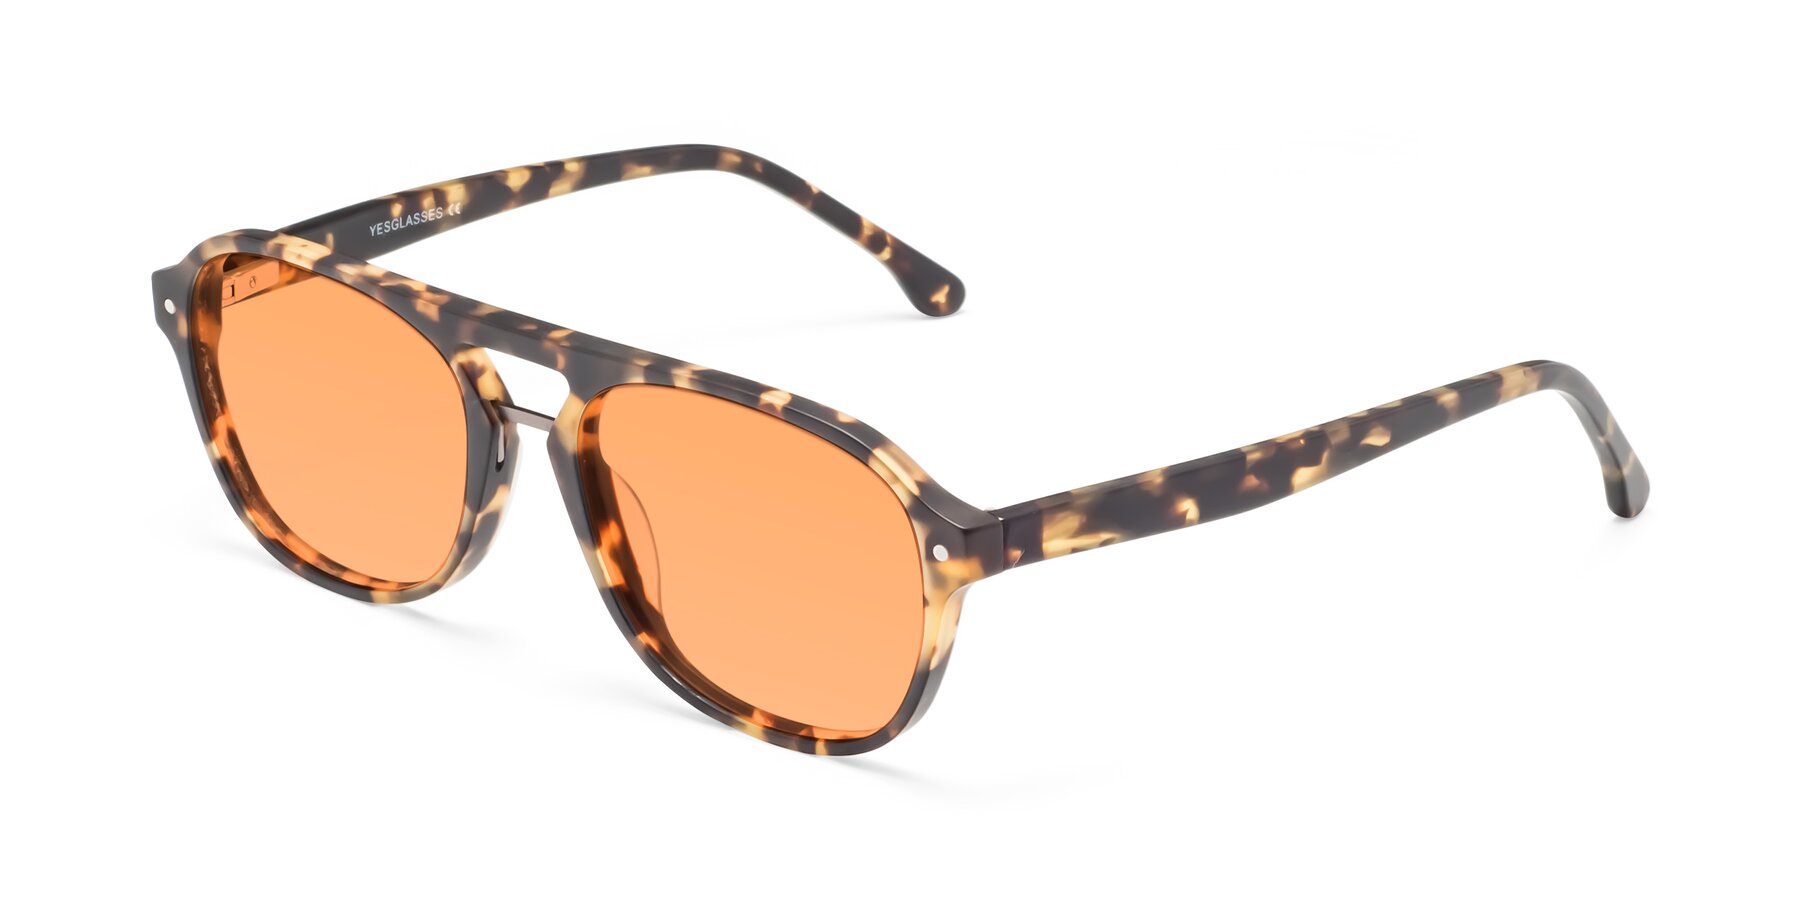 Angle of 17416 in Matte Tortoise with Medium Orange Tinted Lenses